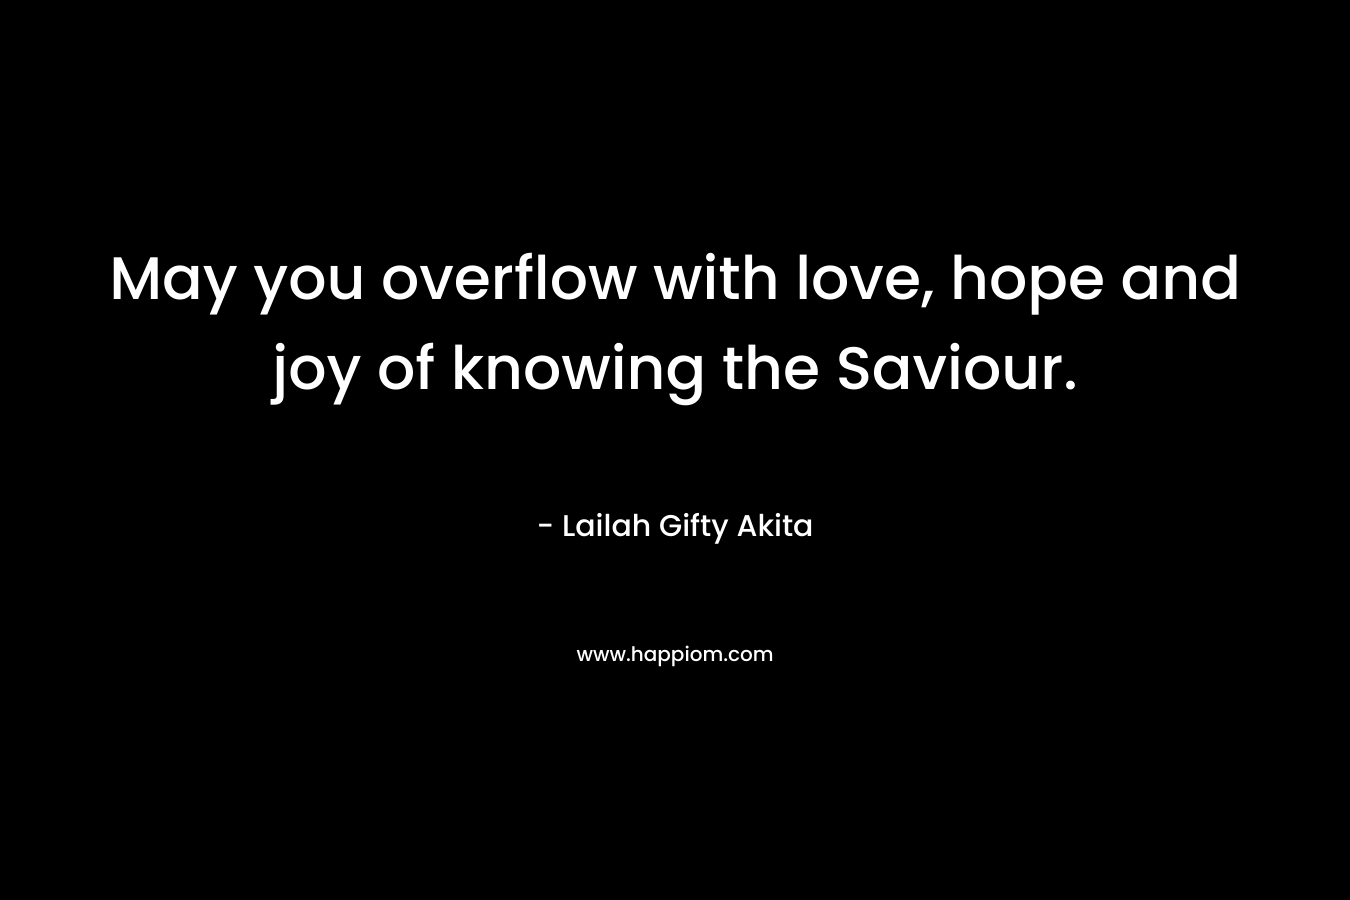 May you overflow with love, hope and joy of knowing the Saviour.